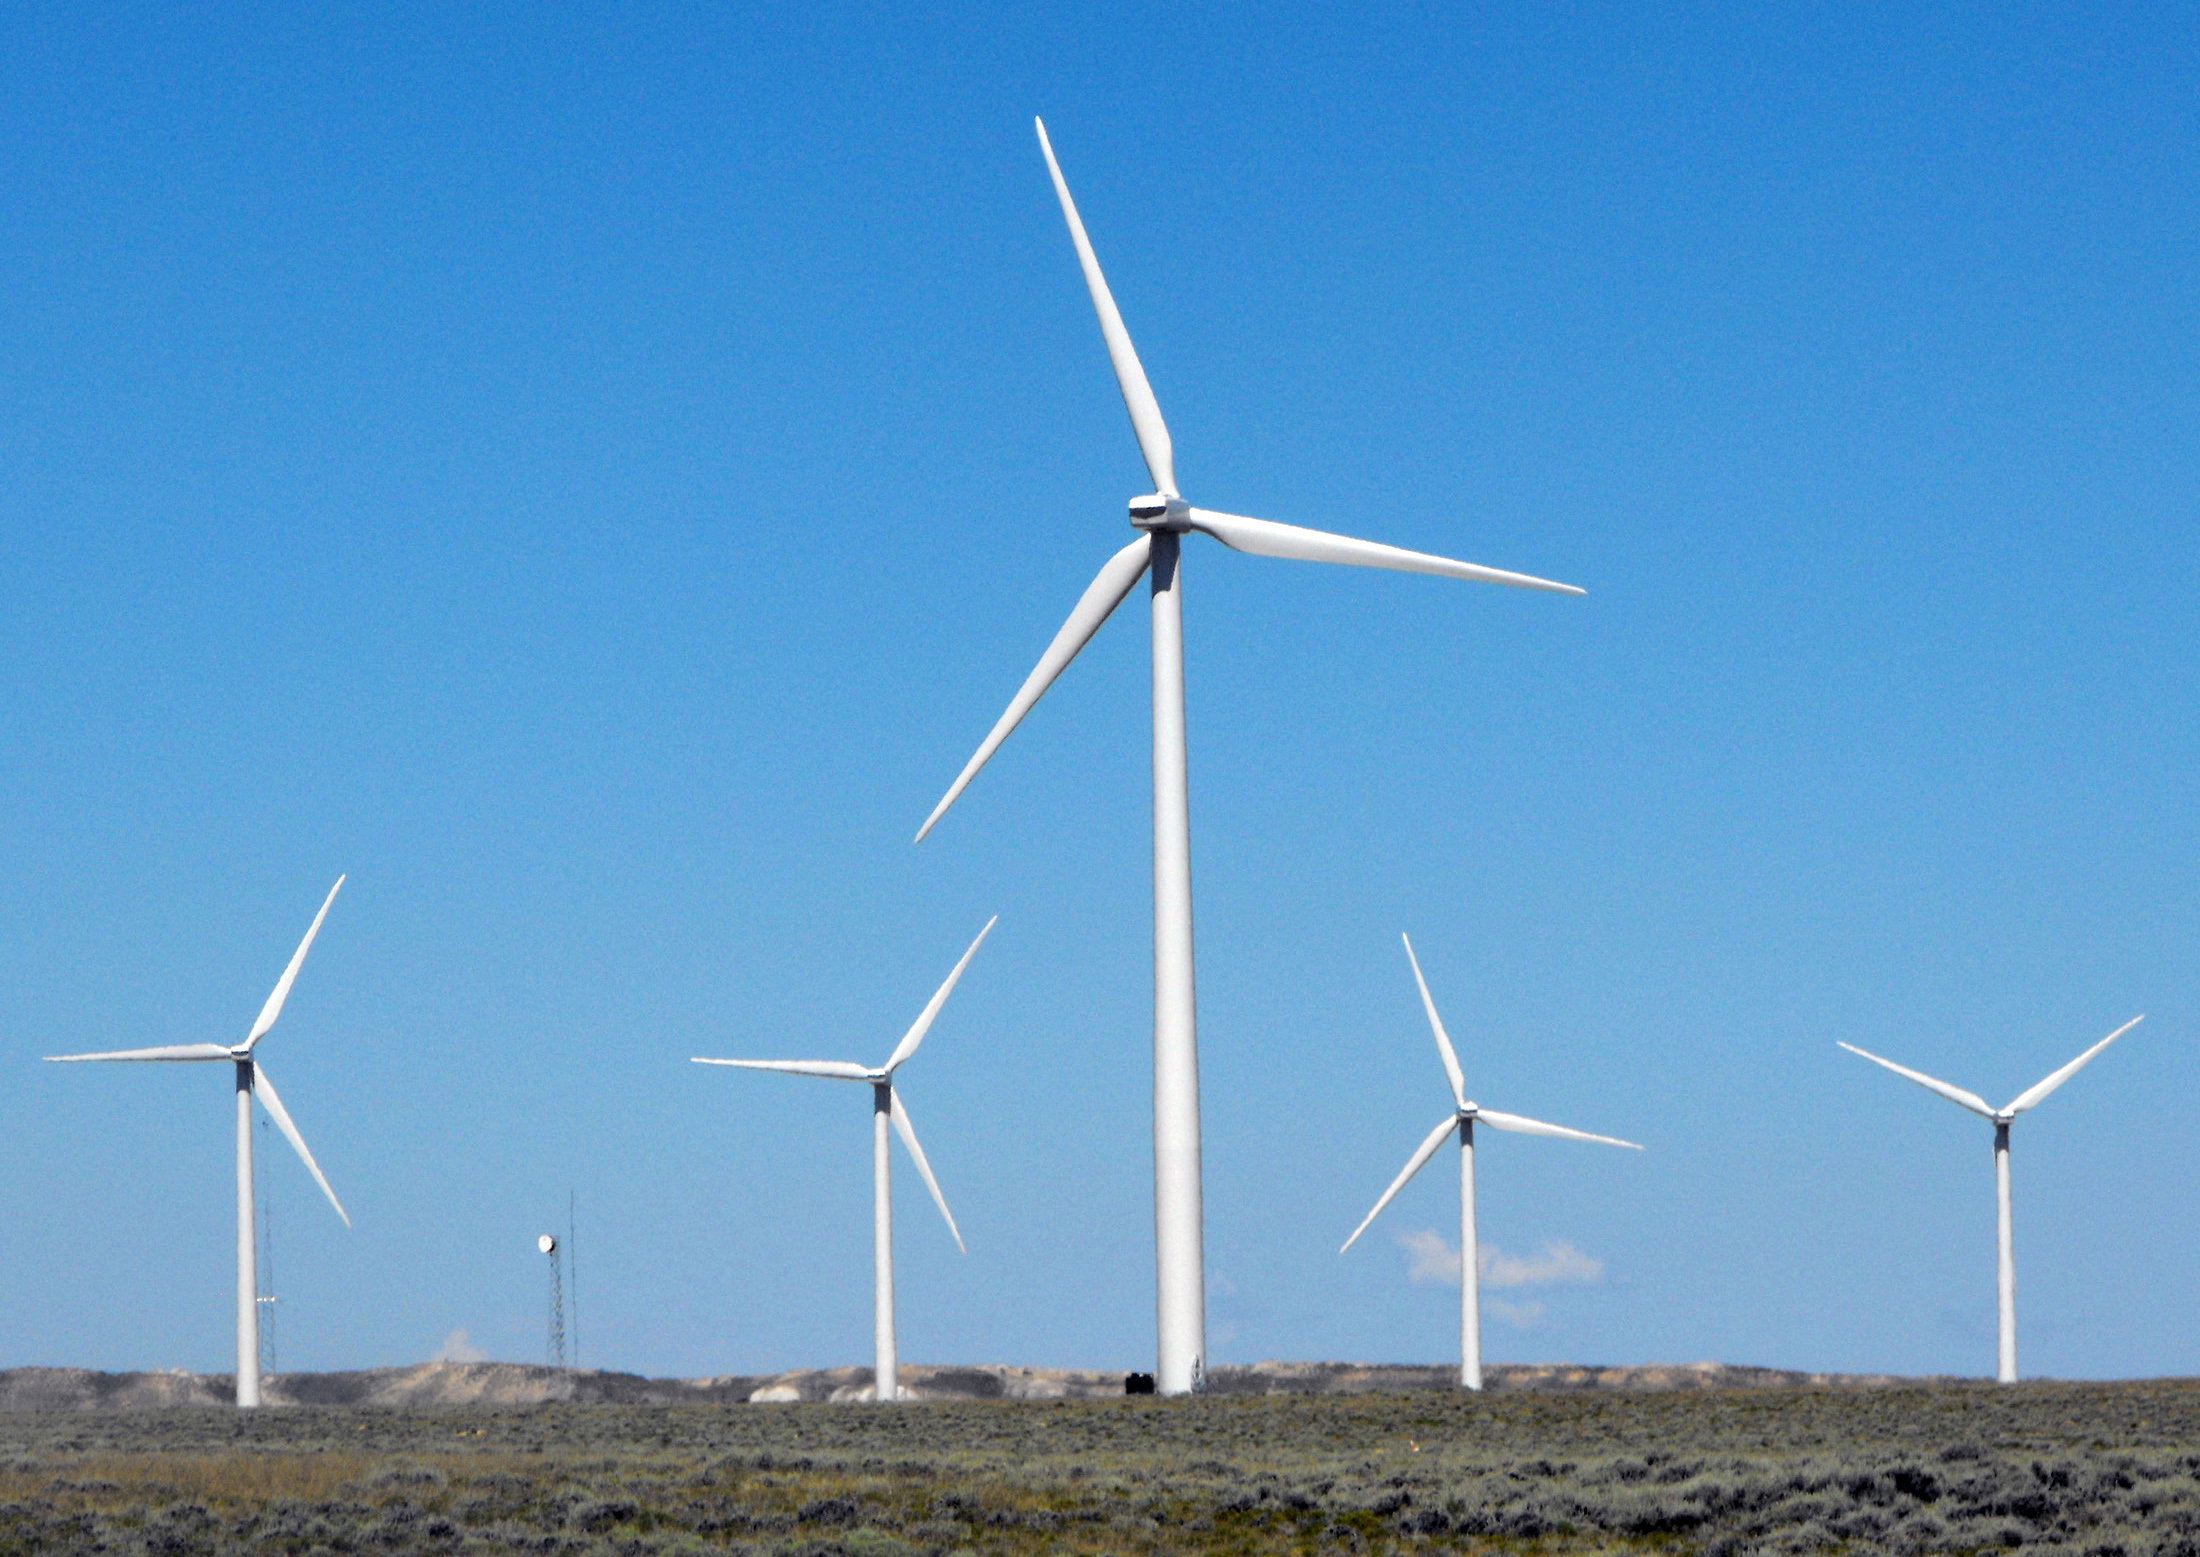 A wind turbine complex is shown in southern Wyoming